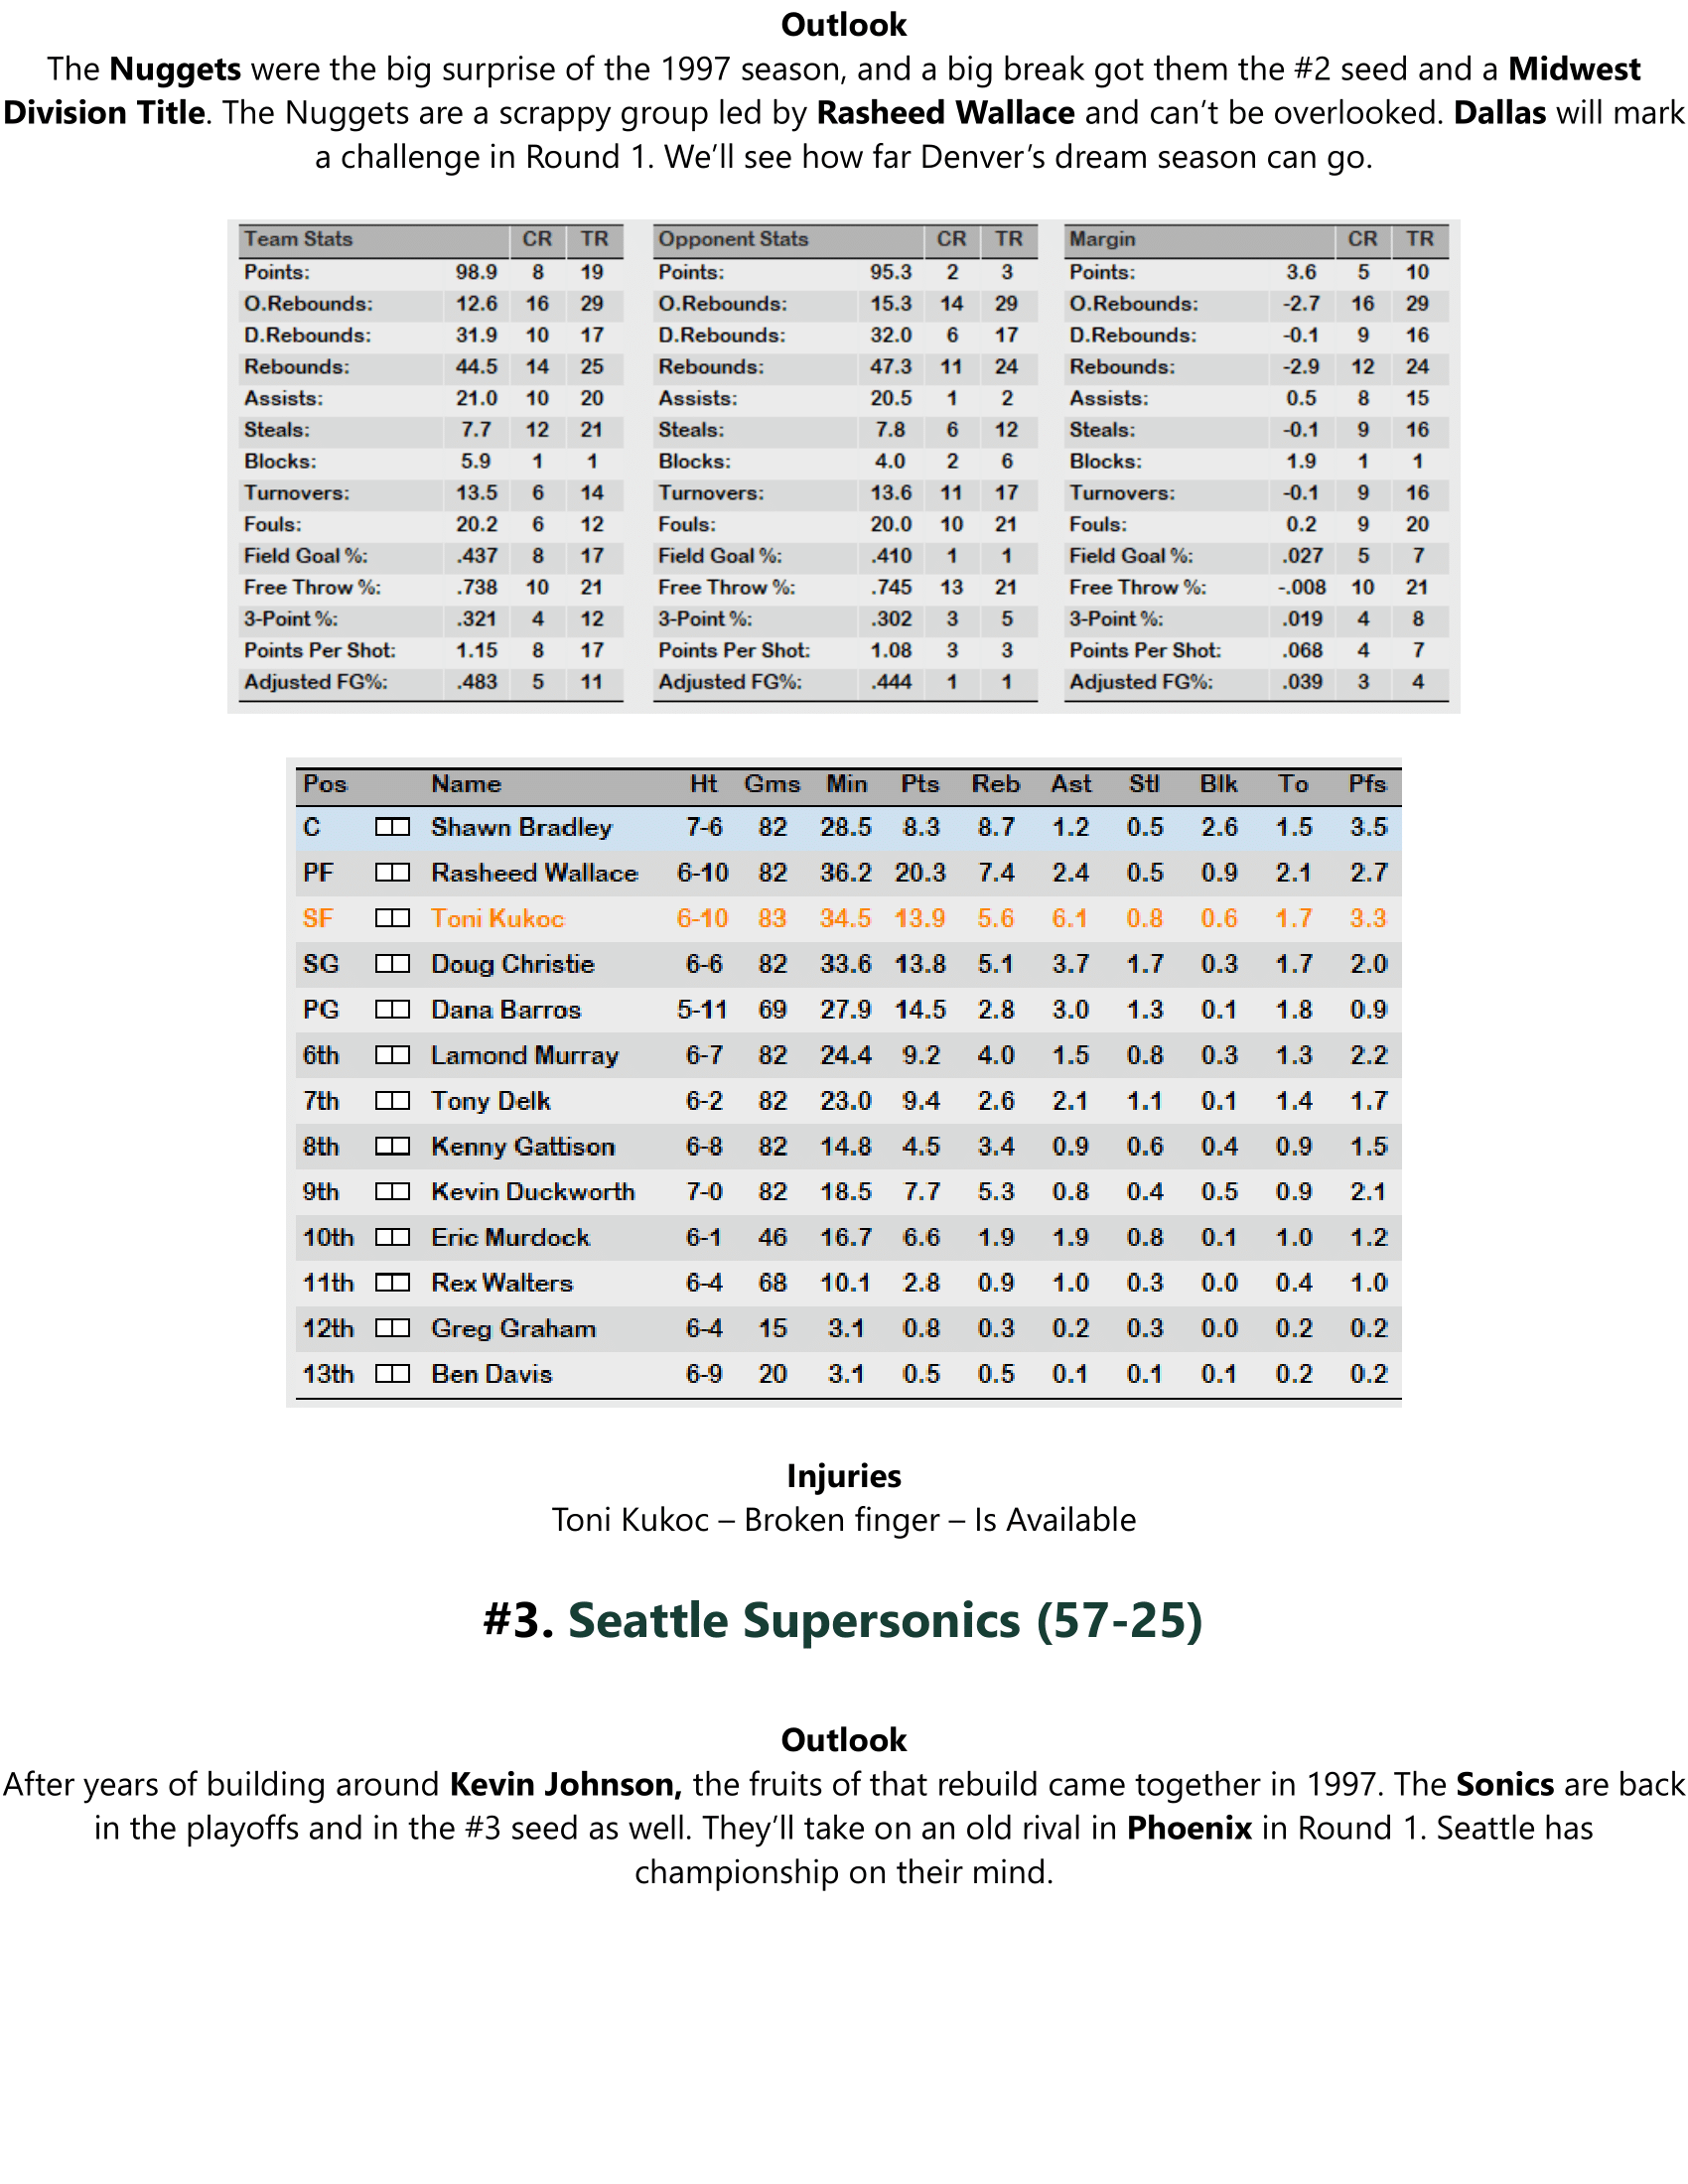 96-97-Part-3-Playoff-Preview-04.png